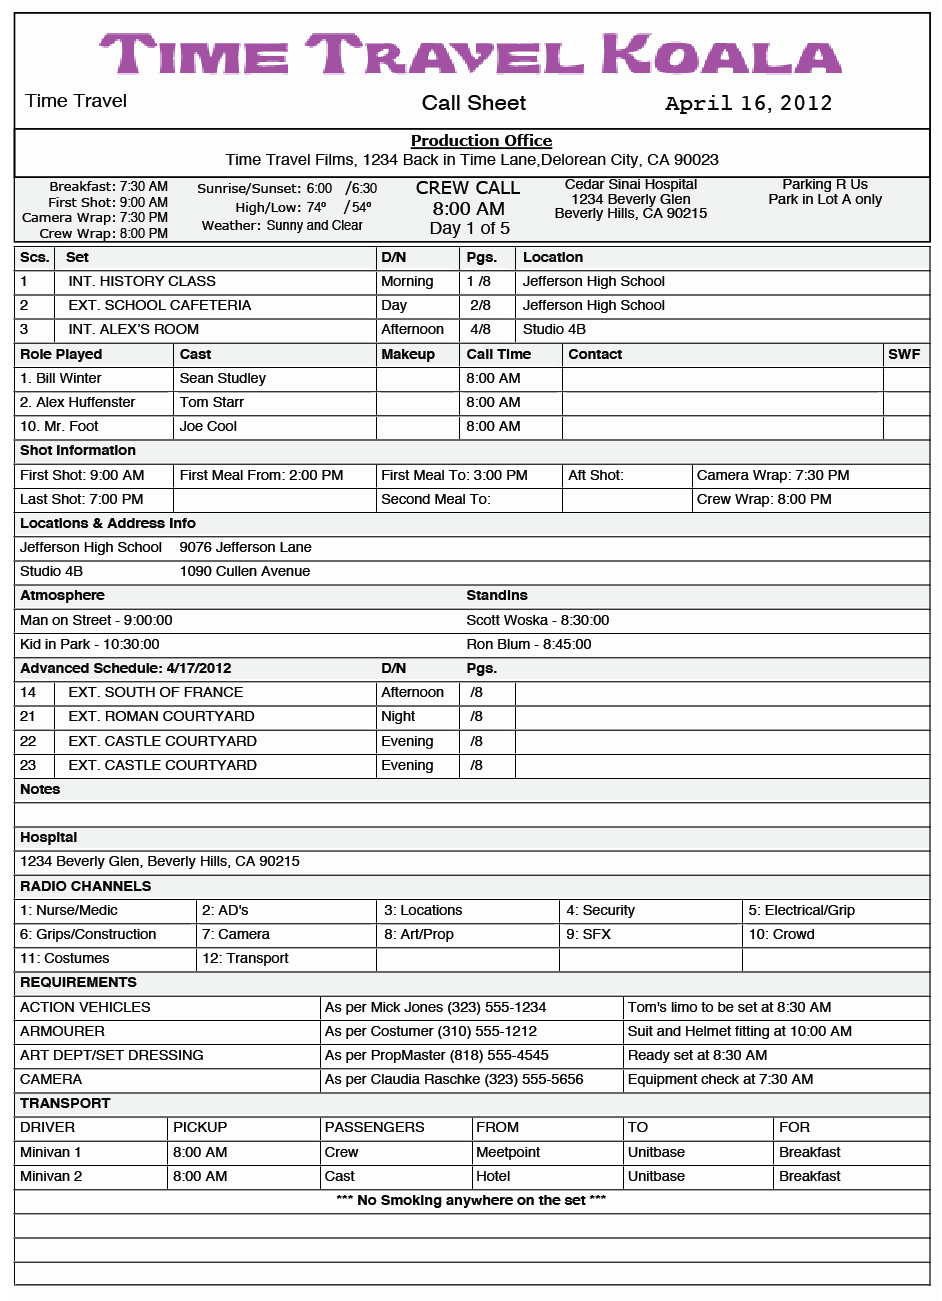 Call Sheet Template Excel Luxury Free Call Sheet Template In Excel